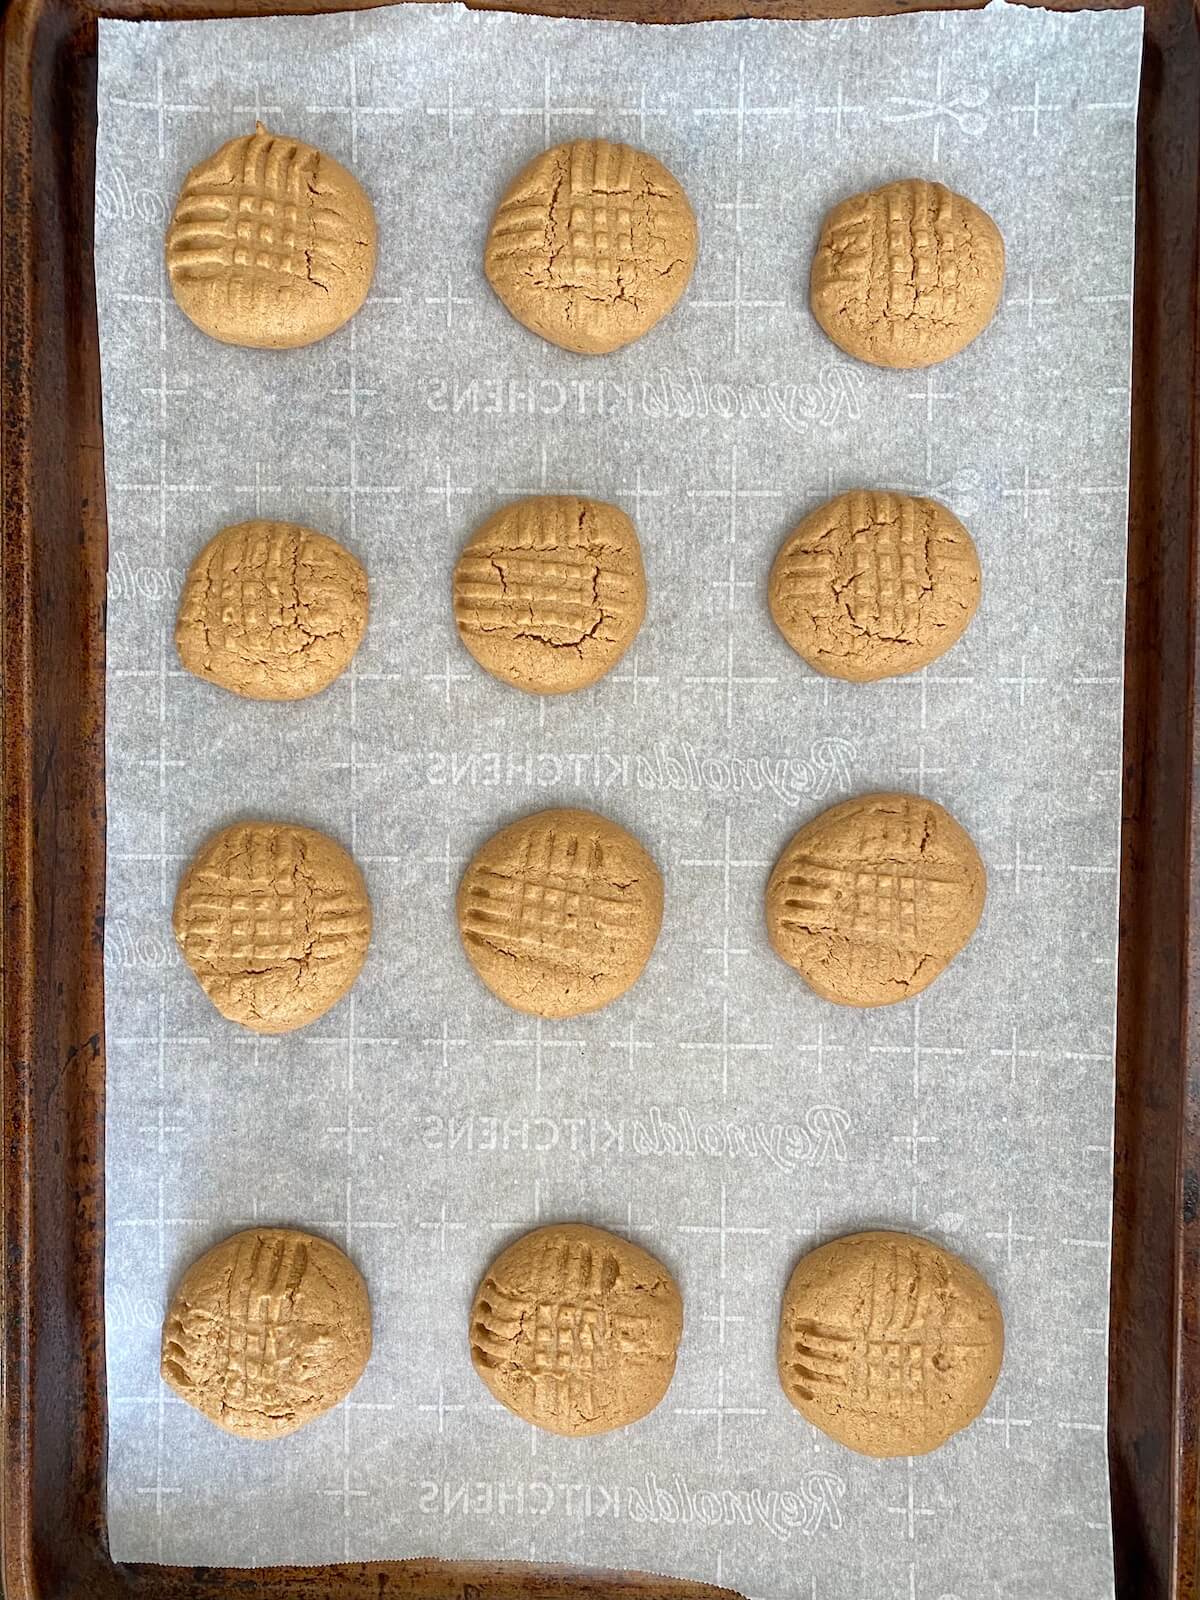 Baked 2 ingredient peanut butter cookies on a parchment-lined baking sheet.